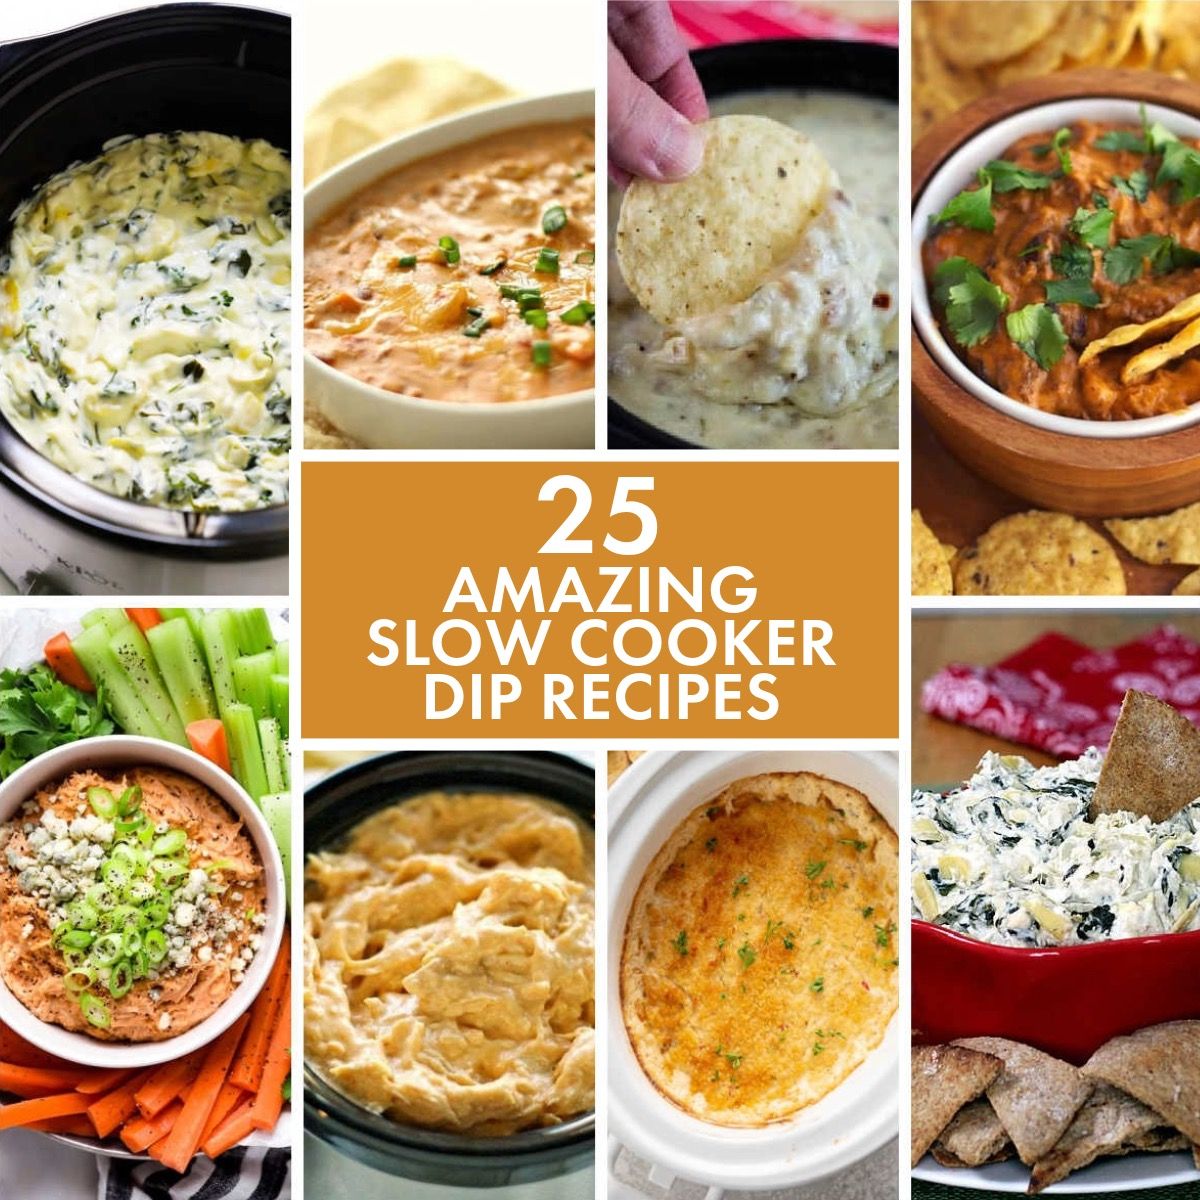 25 Amazing Slow Cooker Dip Recipes collage of featured recipes.